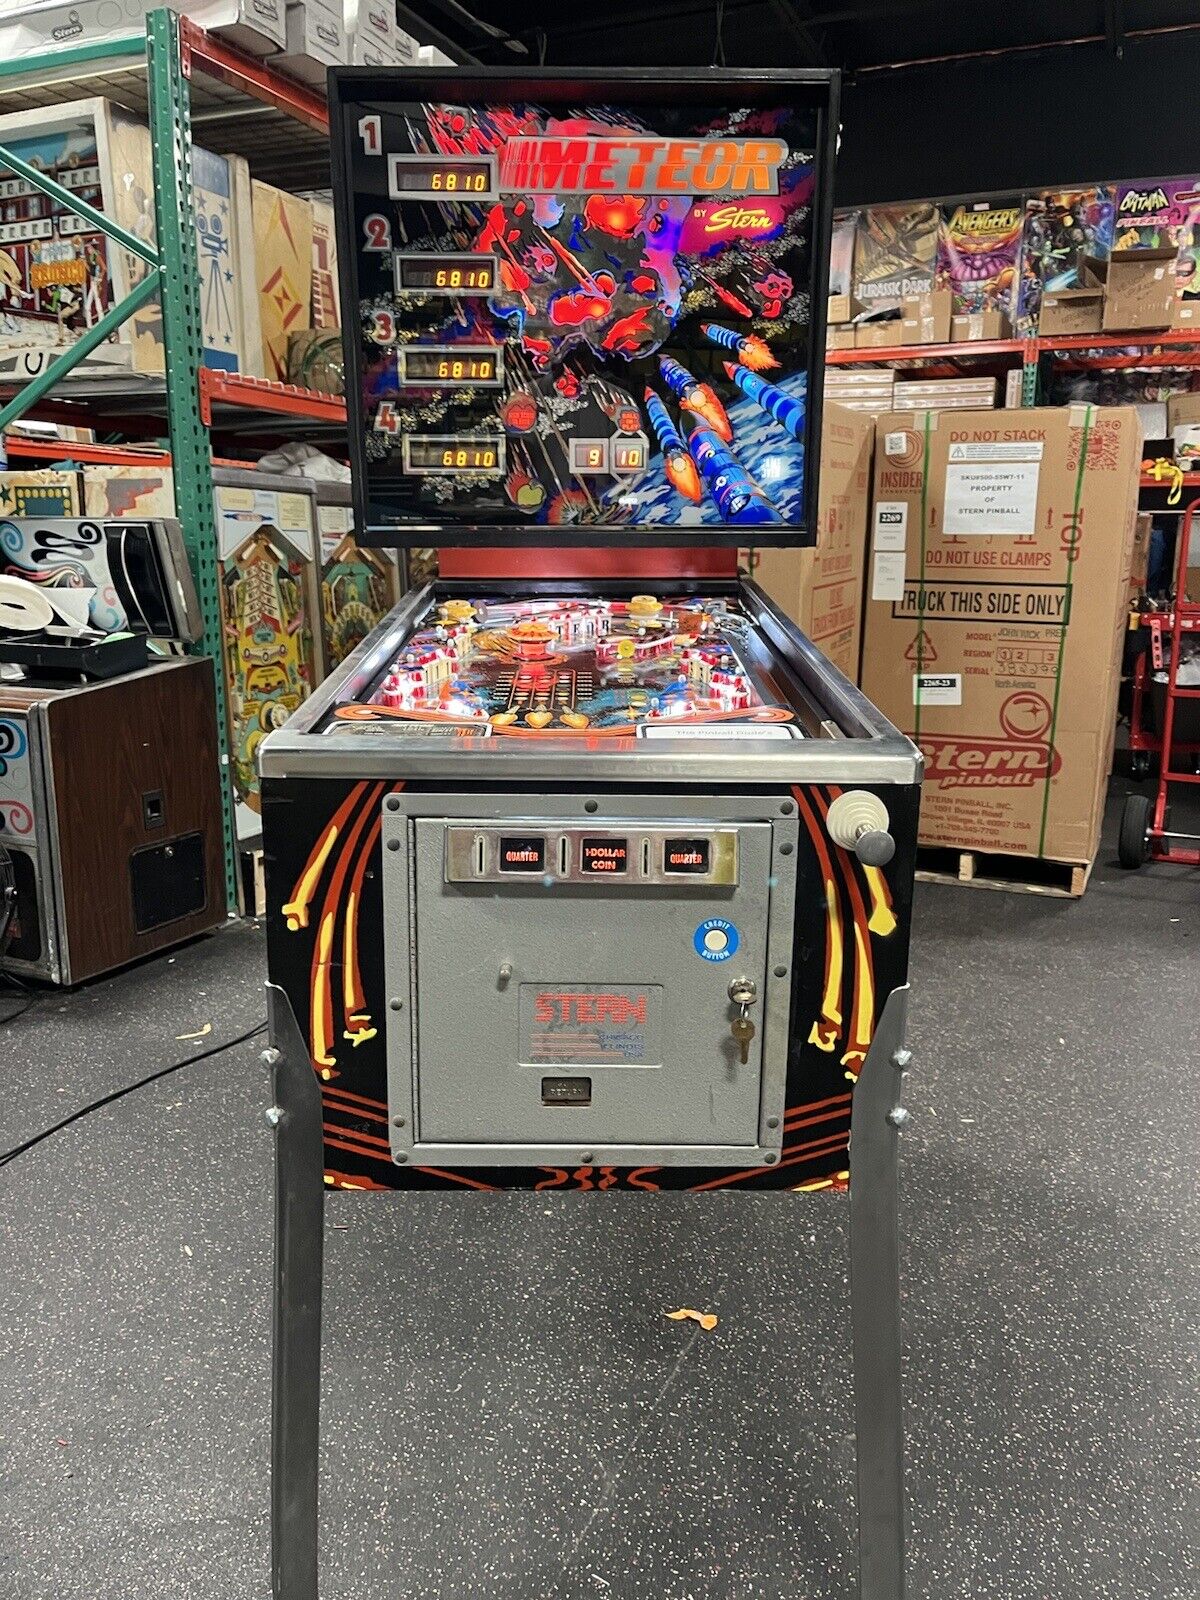 1979 METEOR PINBALL MACHINE LEDS PROFESSIONAL TECHS STERN OUTER SPACE